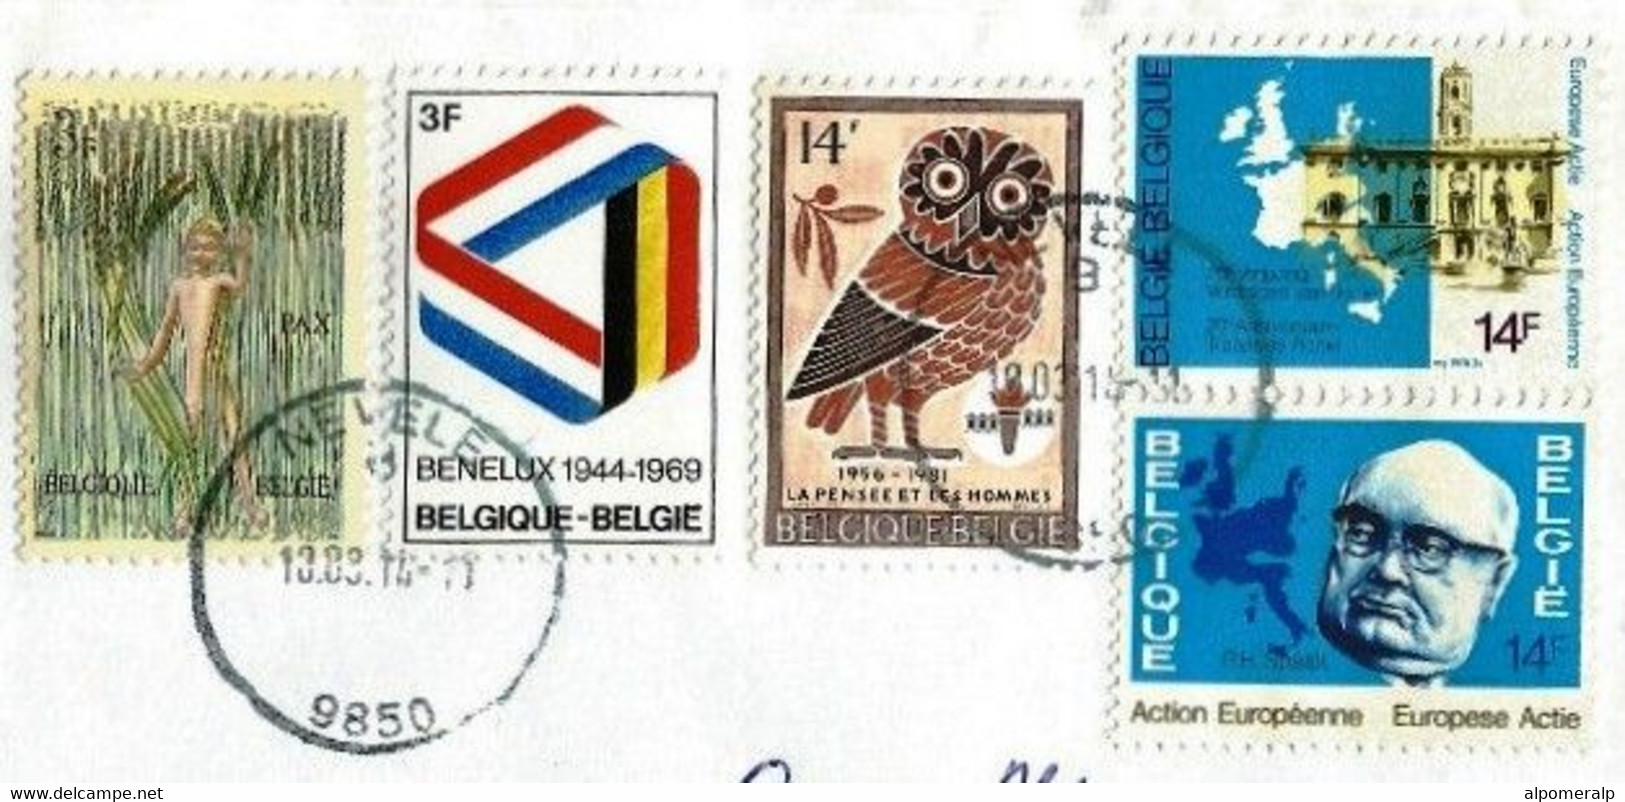 Belgium Nevele 2014 Airmail Multi Stamps Cover Used To Manisa Turkey | Yt 1251, 1500, 2028, 1881-1882 | Owls - Covers & Documents